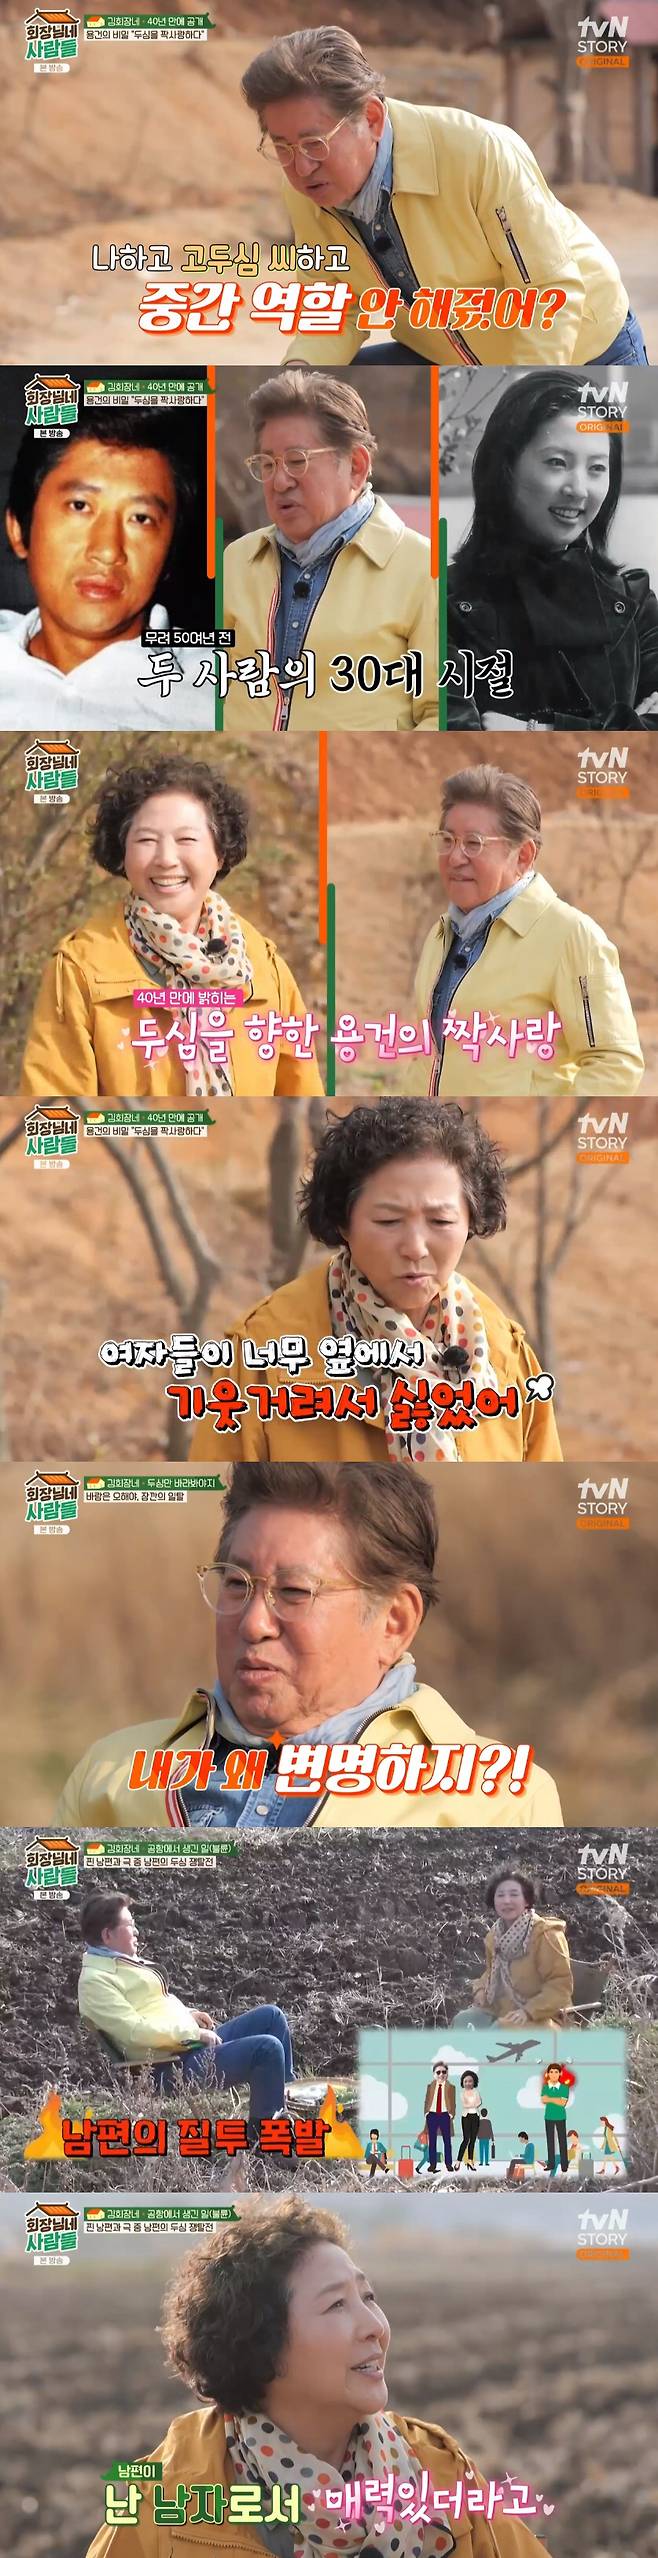 Kim Yong-gun reveals shes reunited with ex-wife after 25 years of divorceIn the TVN STORY Chairpersons People broadcast on the 22nd, the past behind-the-scenes story of Country Diaries couple Kim Yong-gun and Go Doo-shim, who spend their spare time in about 20 years, was revealed.On this day, Kim Yong-gun said, Ye Olden Days, Na Moon-hee tried to play an intermediate role between me and Go Doo-shim.Because Na Moon-hee knew that I liked Go Doo-shim. He confessed that he had a crush on Go Doo-shim in the past.Go Doo-shim said, I did not think of my brother as a husband because I did not like it because I was too snooping around. I did not like it because it did not seem to be mine.Kim Yong-gun said, I did not play a lot, but rather people who played it say that they live a more stable life when they get married.Later, while recalling memories of Country Diaries, Kim Yong-gun recalled what he had done in the play.Kim Yong-gun explained, Its all a misunderstanding, but Go Doo-shim was excited, saying, Anyway, I dont like any wife who meets other women besides me. Its the thing I hate the most.Kim Yong-gun said, I think I deviated because I was frustrated because I was living in a stereotyped workplace. Even if I sold it for a while, he explained. Then, why do I make excuses like this?I think there really was something there, he said with a smile.Go Doo-shim recalled what he had experienced at the airport in the past after shooting Kim Yong-gun and province, he said, I took provincial shots and ended up late, so I stayed overnight and flew back.At that time, my husband came to the airport and I was jealous when I saw them coming out. Kim Yong-gun greeted me with a warm greeting and asked me to go to me without looking at me. Kim Yong-gun said, (Go Doo-shims husband) shook his head. How embarrassed must I have been? Then he met me and asked me why I did not accept greetings.Go Doo-shim smiled, saying, At that time, my husband looked attractive and cool because he did it as a man.Kim Yong-gun described his relationship with Go Doo-shim as fateful and said, I have been married for 20 years and divorced. In Country Diaries, I have been married for 22 years.And the mother of the children is Ko, and I met Ko again in Country Diaries. Ko said, There is only one Jeju Ko, which is also fateful. Go Doo-shim said, It is so funny.Then Kim Yong-gun said, Nagado Ko, even if you come in, and burst into laughter.On the other hand, Kim Yong-gun confided in his reunion with his ex-wife at the Wedding ceremony of his son Yeong-Hoon Kim and Hwang Bo Ra.He said, This time, when my second son gets married, he asked me if I should call my mom during the wedding ceremony.And I met at Wedding ceremony, and after 25 years of divorce, I was reunited. He said, I was sick because I heard that my health was bad.The next day, Second heard the story and said to me, Thank you so much, Dad. He told me that he gave me a word and warmed me up. Kim Yong-gun also said, At that time, I thought I had a lot of shortcomings, so I only thought about my heartache and thought there was nothing wrong with me. But Im a mother to my kids. (The kids) keep in touch. Why wouldnt they? I know everything.Then Go Doo-shim said, When Jung Woo gets married, sit together, and Kim Yong-gun joked, Come with me when Jung Woo gets married. Sit next to me on both sides.Go Doo-shim said, We do not have to hurt children because of us.Its our job, he said. Ye Olden Days, after the divorce, when the childrens father came home and had time to spend time with the children, the son said, Father, goodbye and went upstairs and closed the door and cried.Its our job, but what are the children guilty of? (Second) Jung-hwan has become more shy because he doesnt have Fathers energy. Fathers absence is too big. He should have a father, he said.